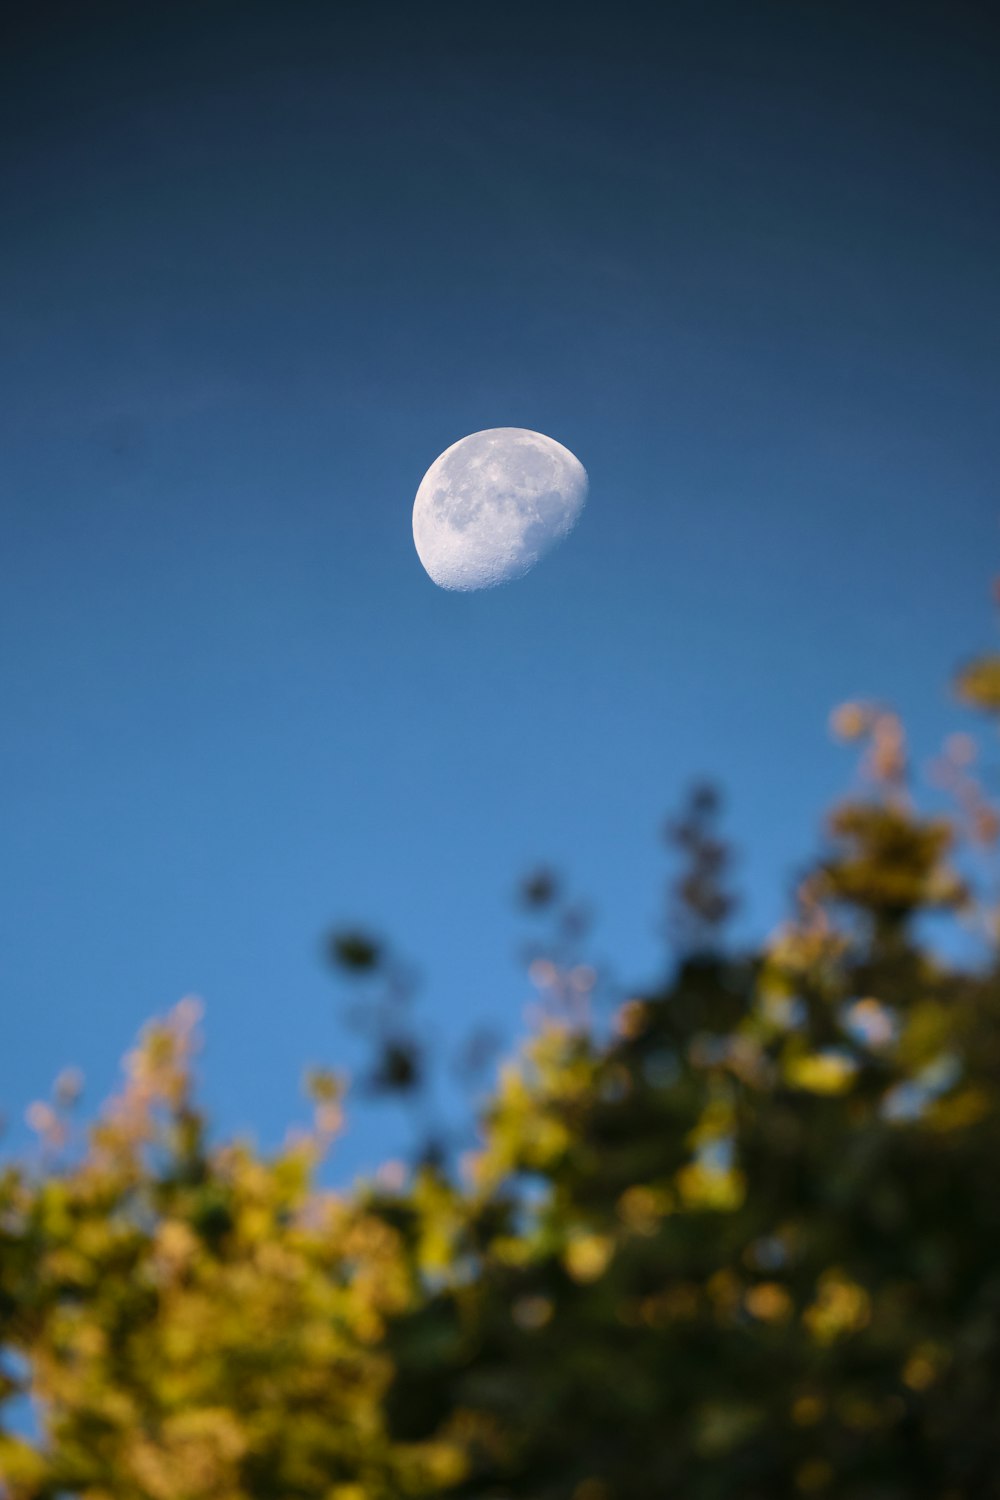 the moon is seen through the trees on a clear day